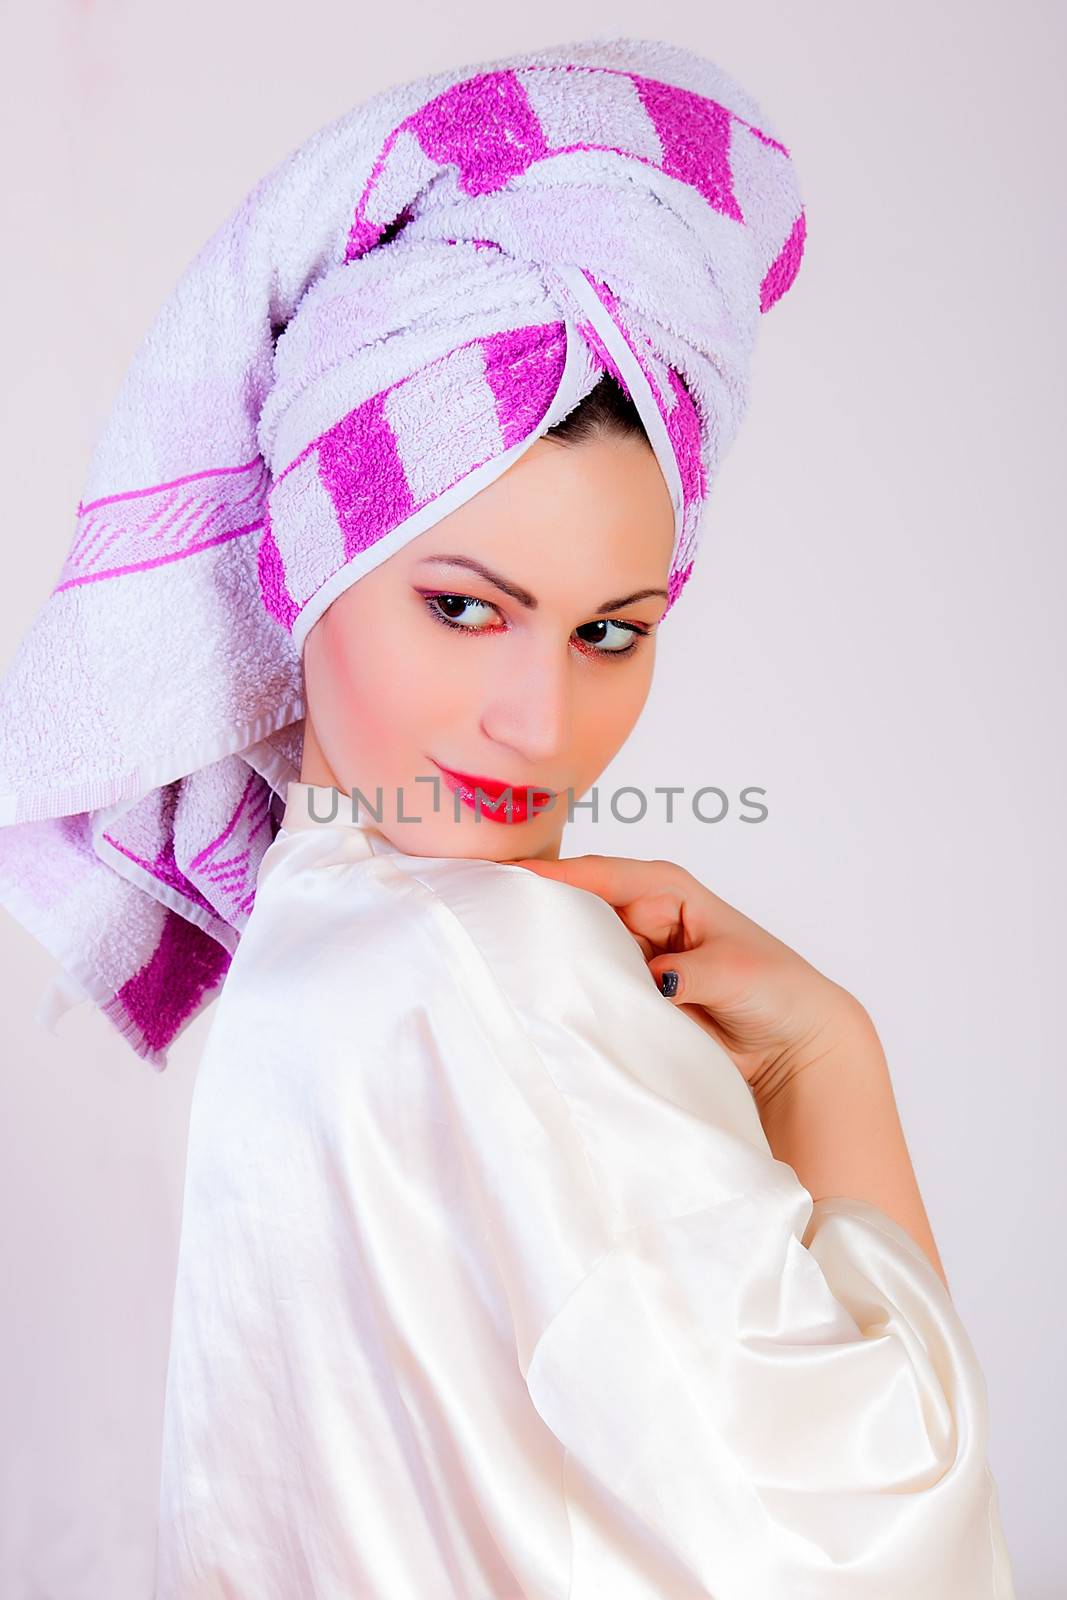 Attractive girl with towel on her head by dukibu